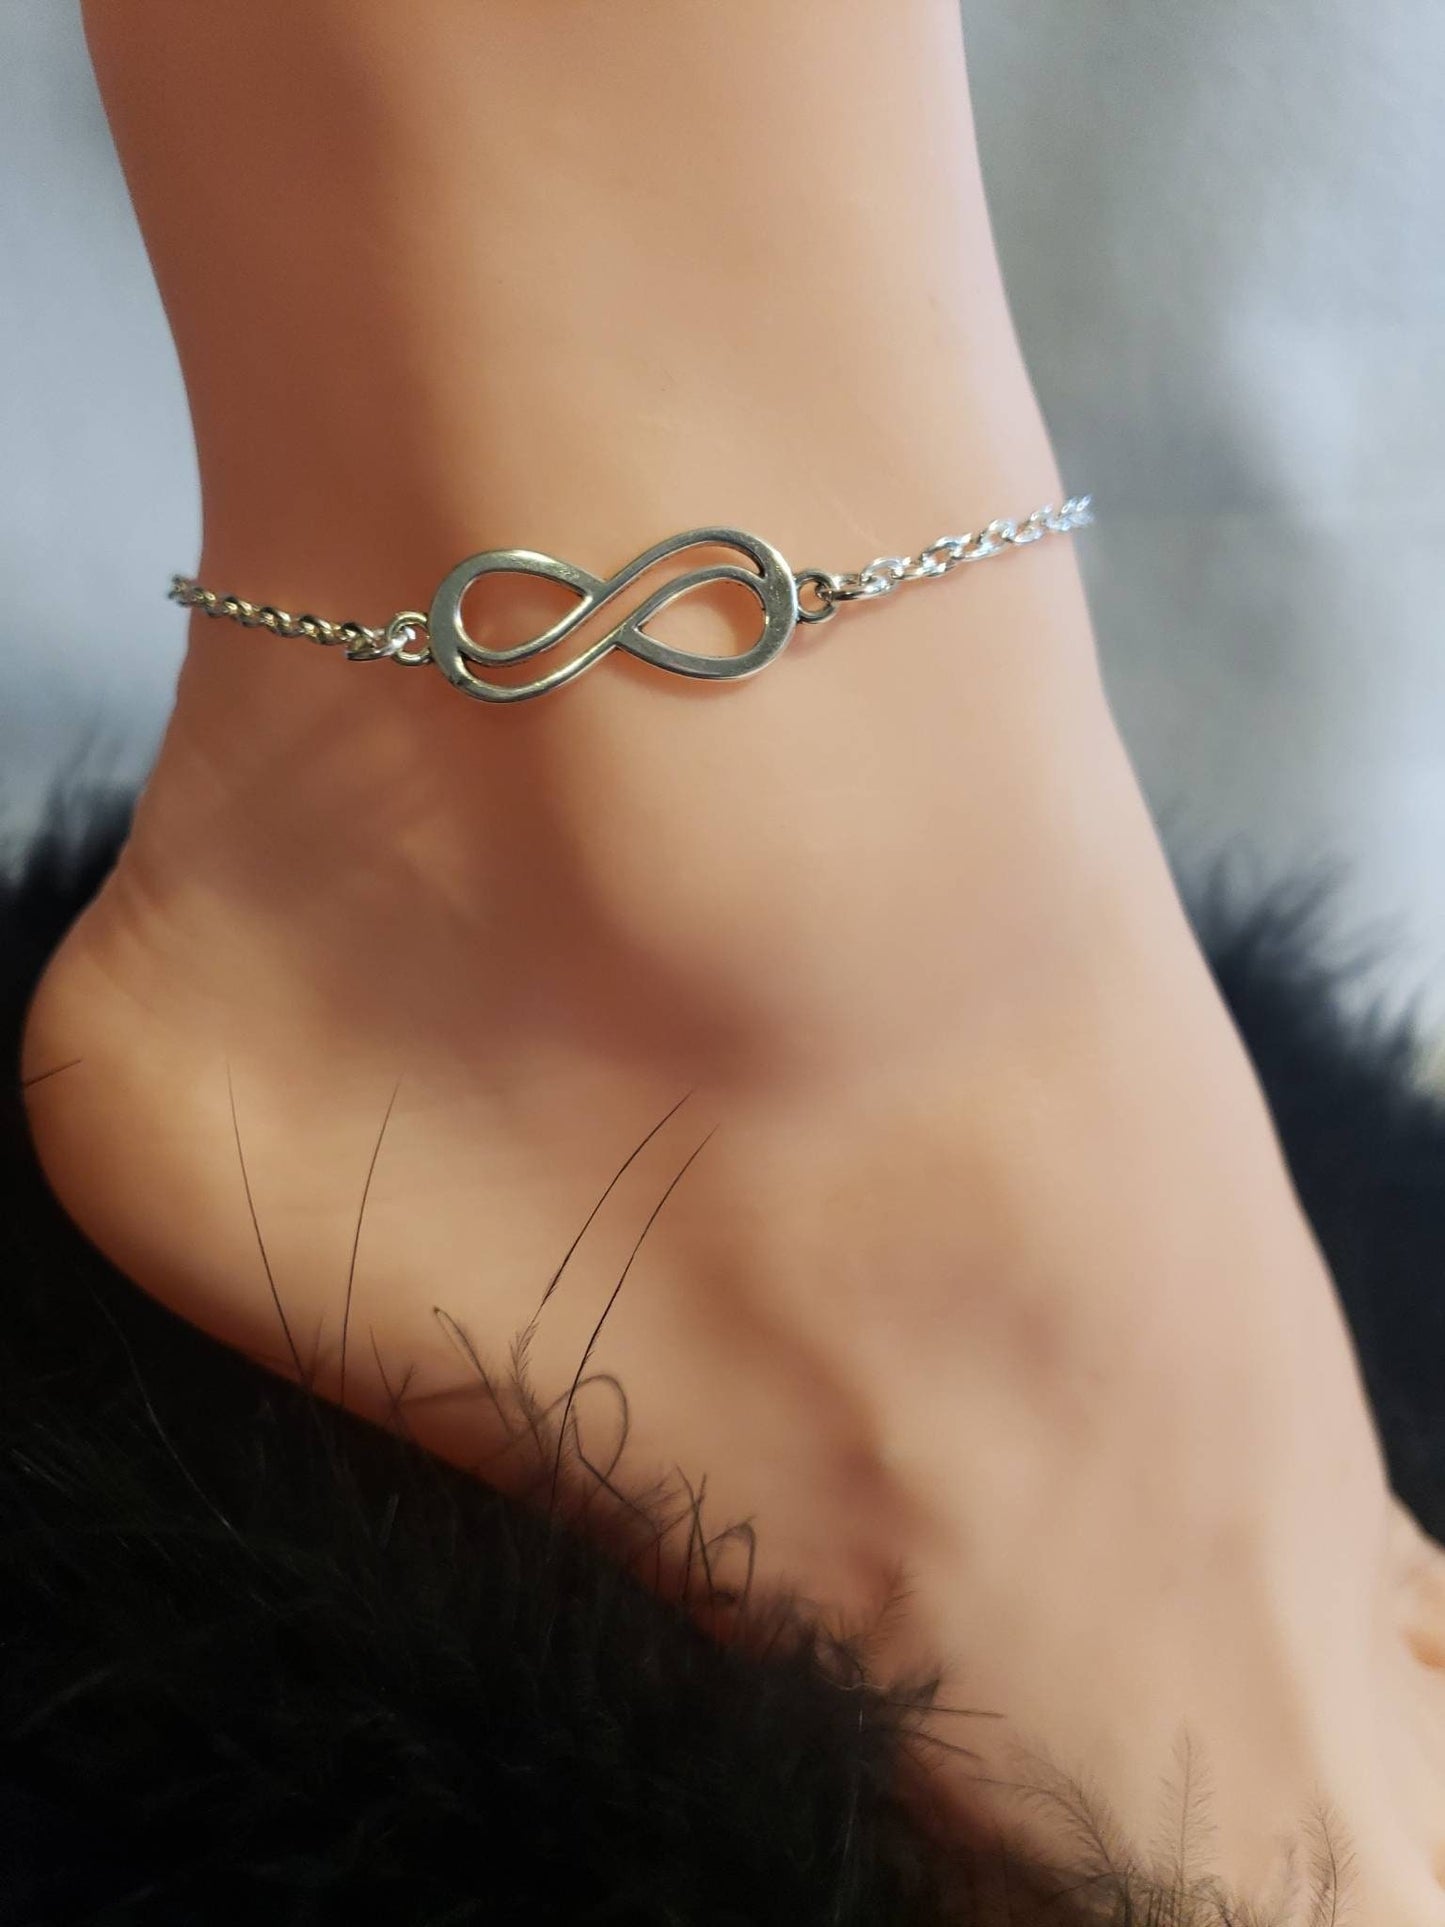 HotWife Anklet, Everyday Anklet, Infinity Anklet, Kinky Anklet, Sexy Anklets, Swinger Jewelry